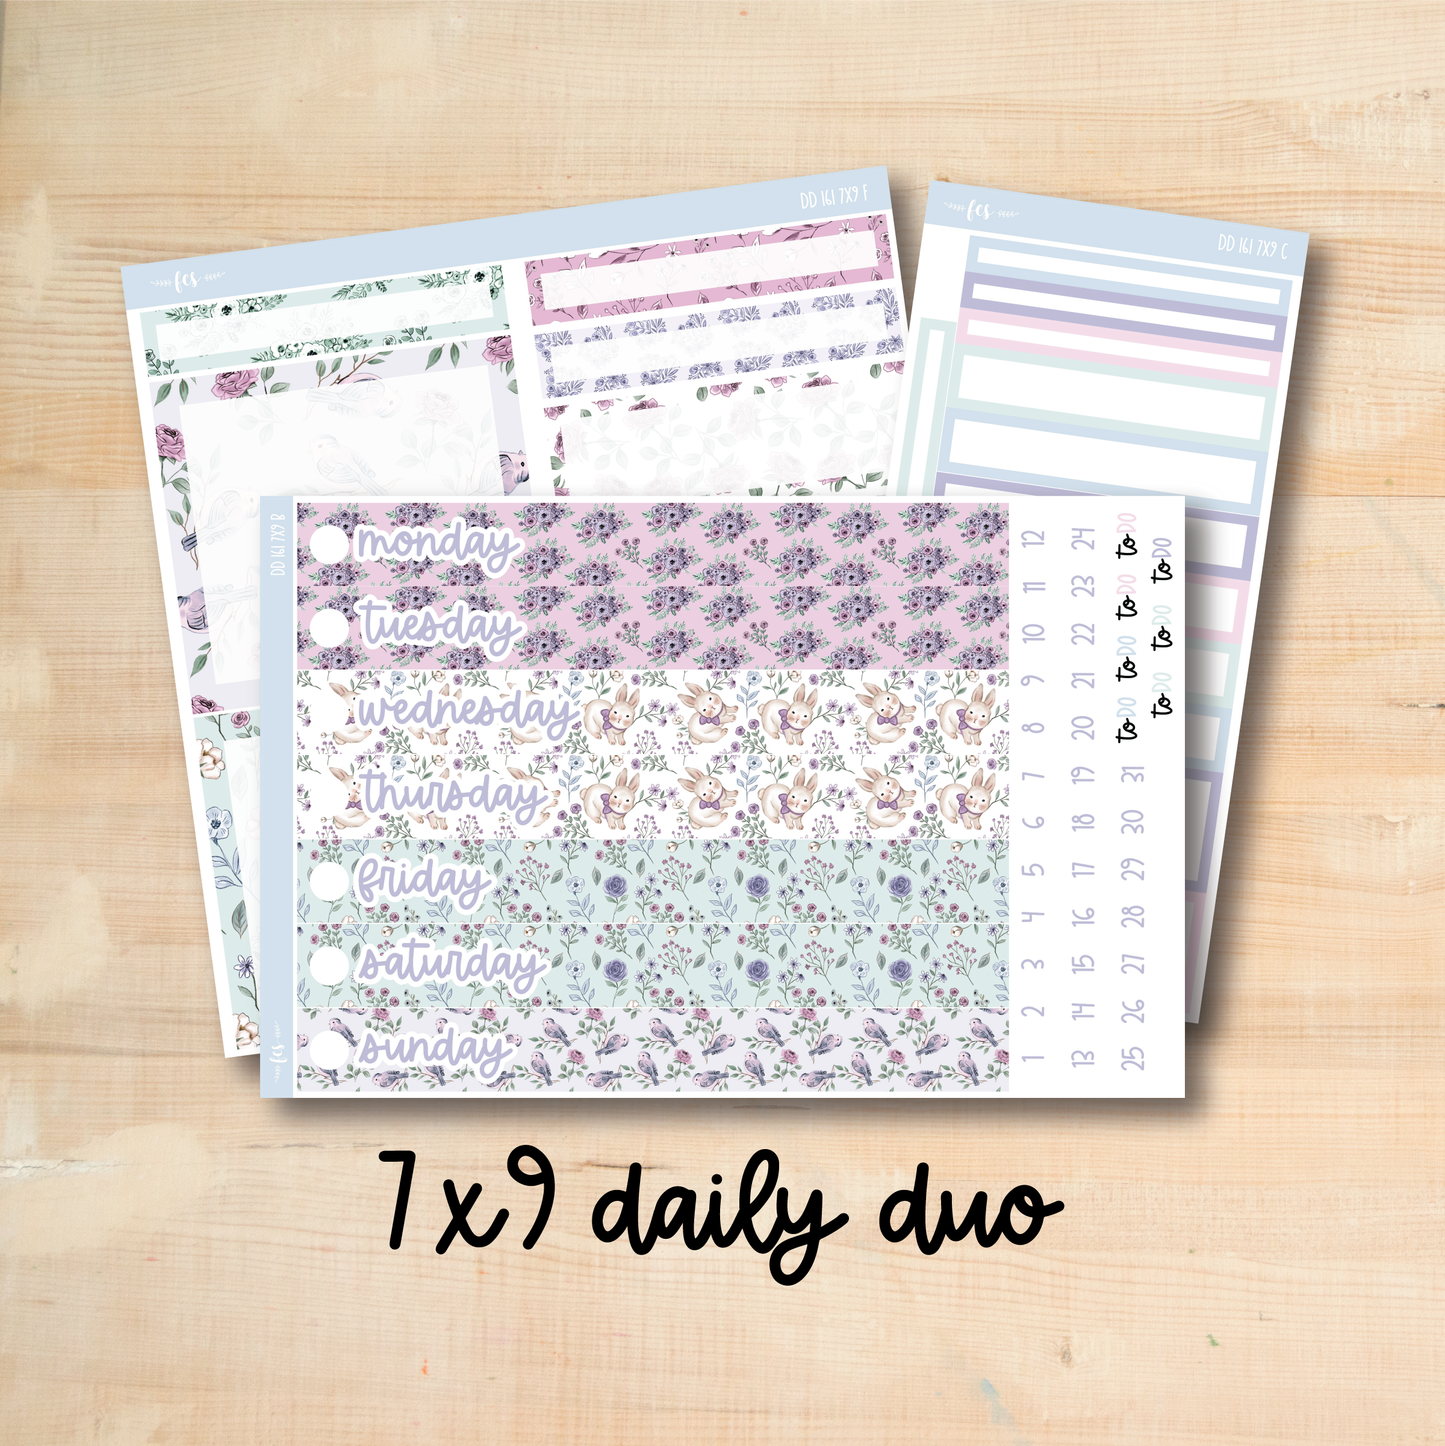 7x9 Daily Duo 161 || COTTAGE GARDEN 7x9 Daily Duo Kit